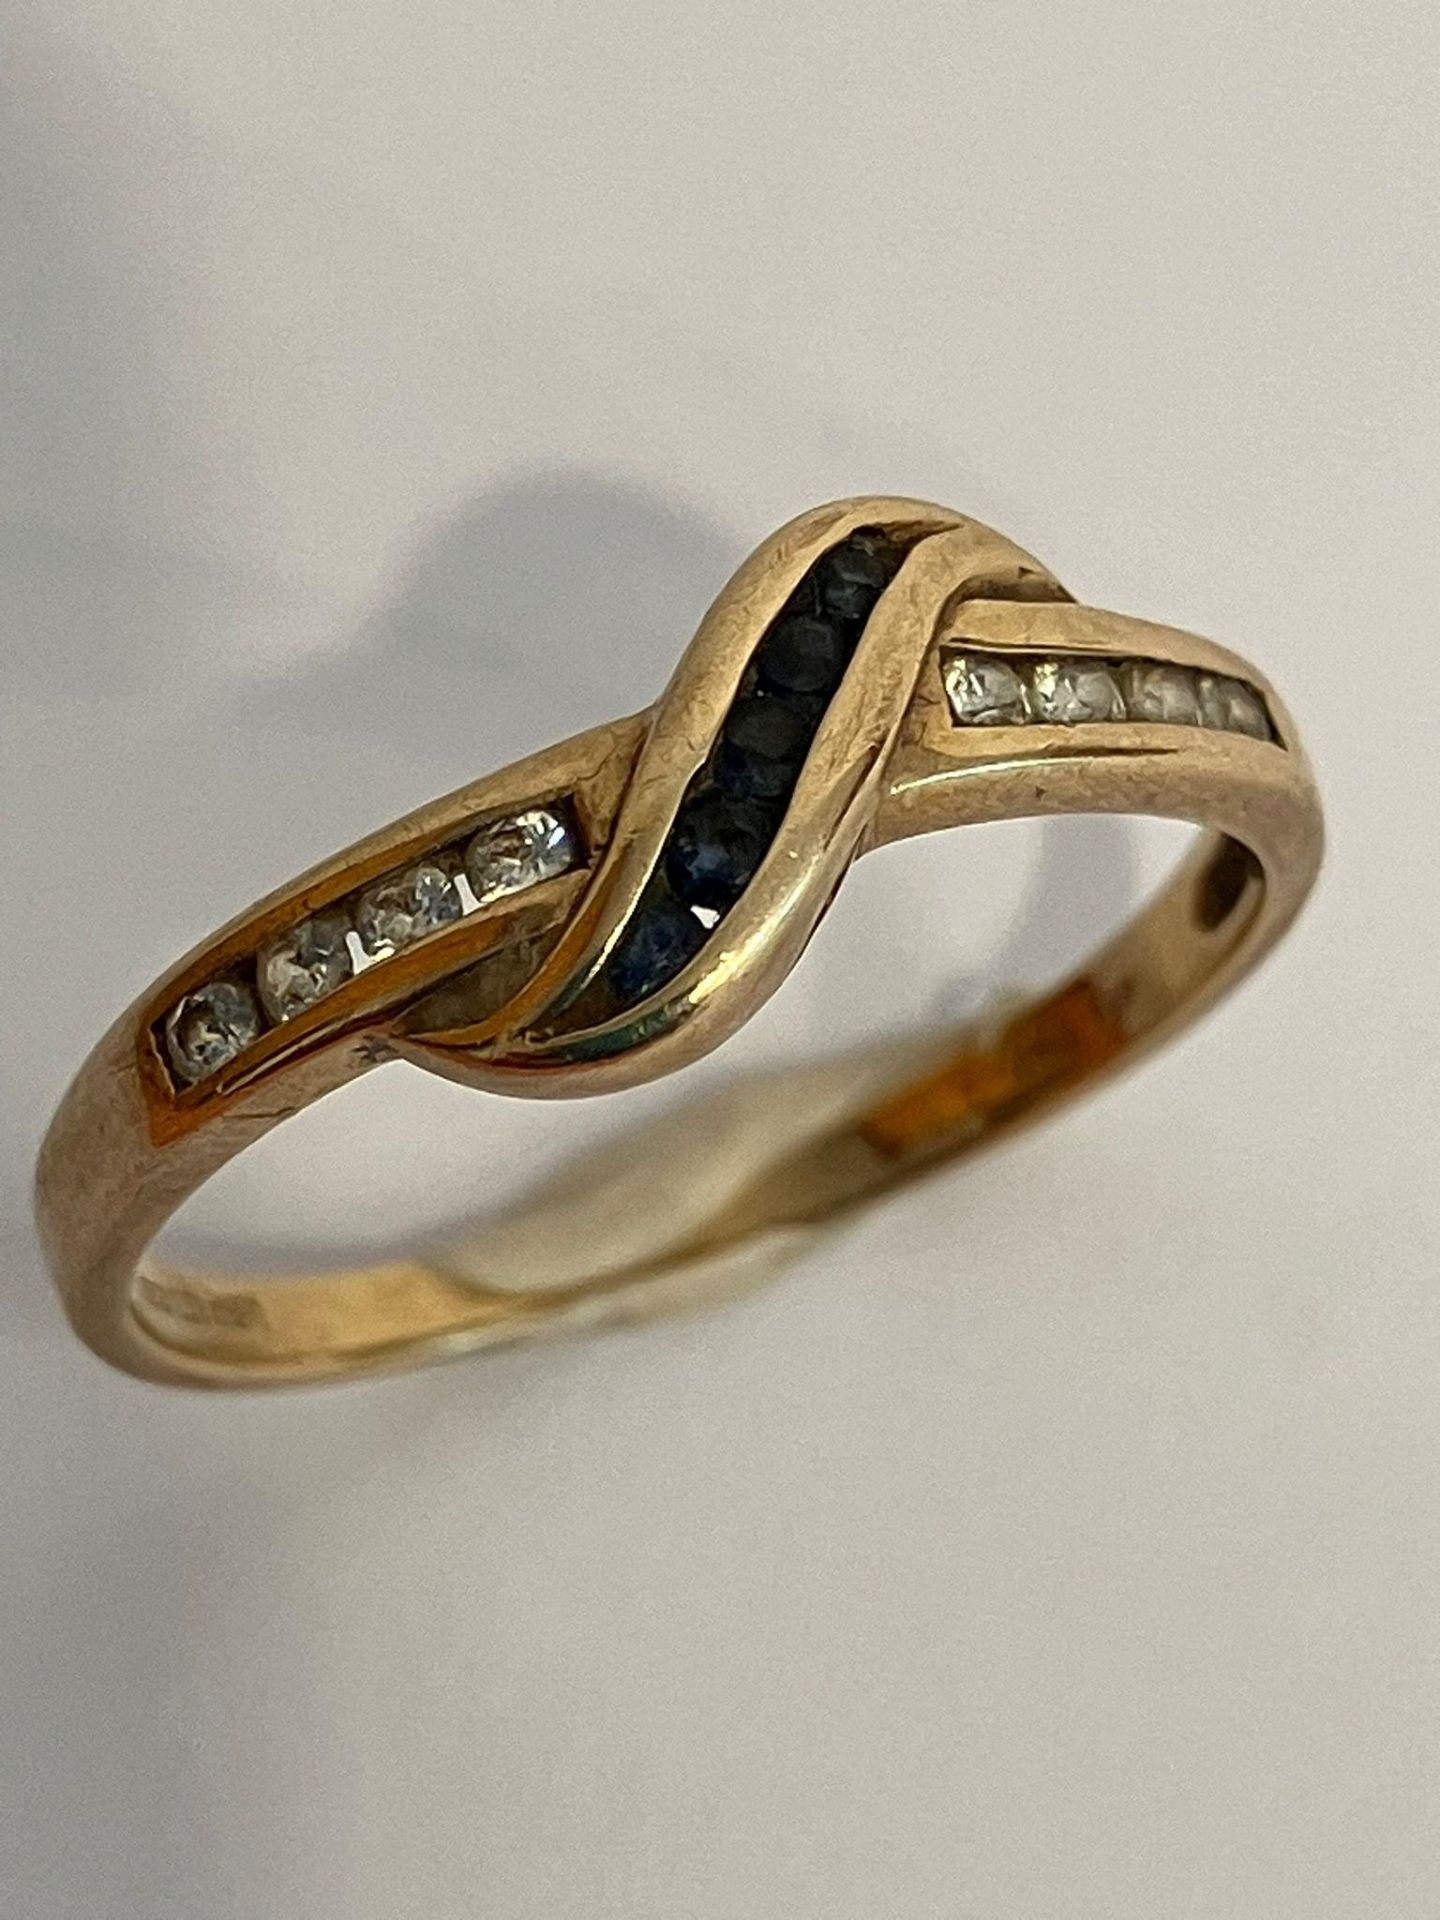 Interesting 9 carat GOLD RING set with BLACK and WHITE ZIRCONIA. Complete with ring box.1.5 grams.